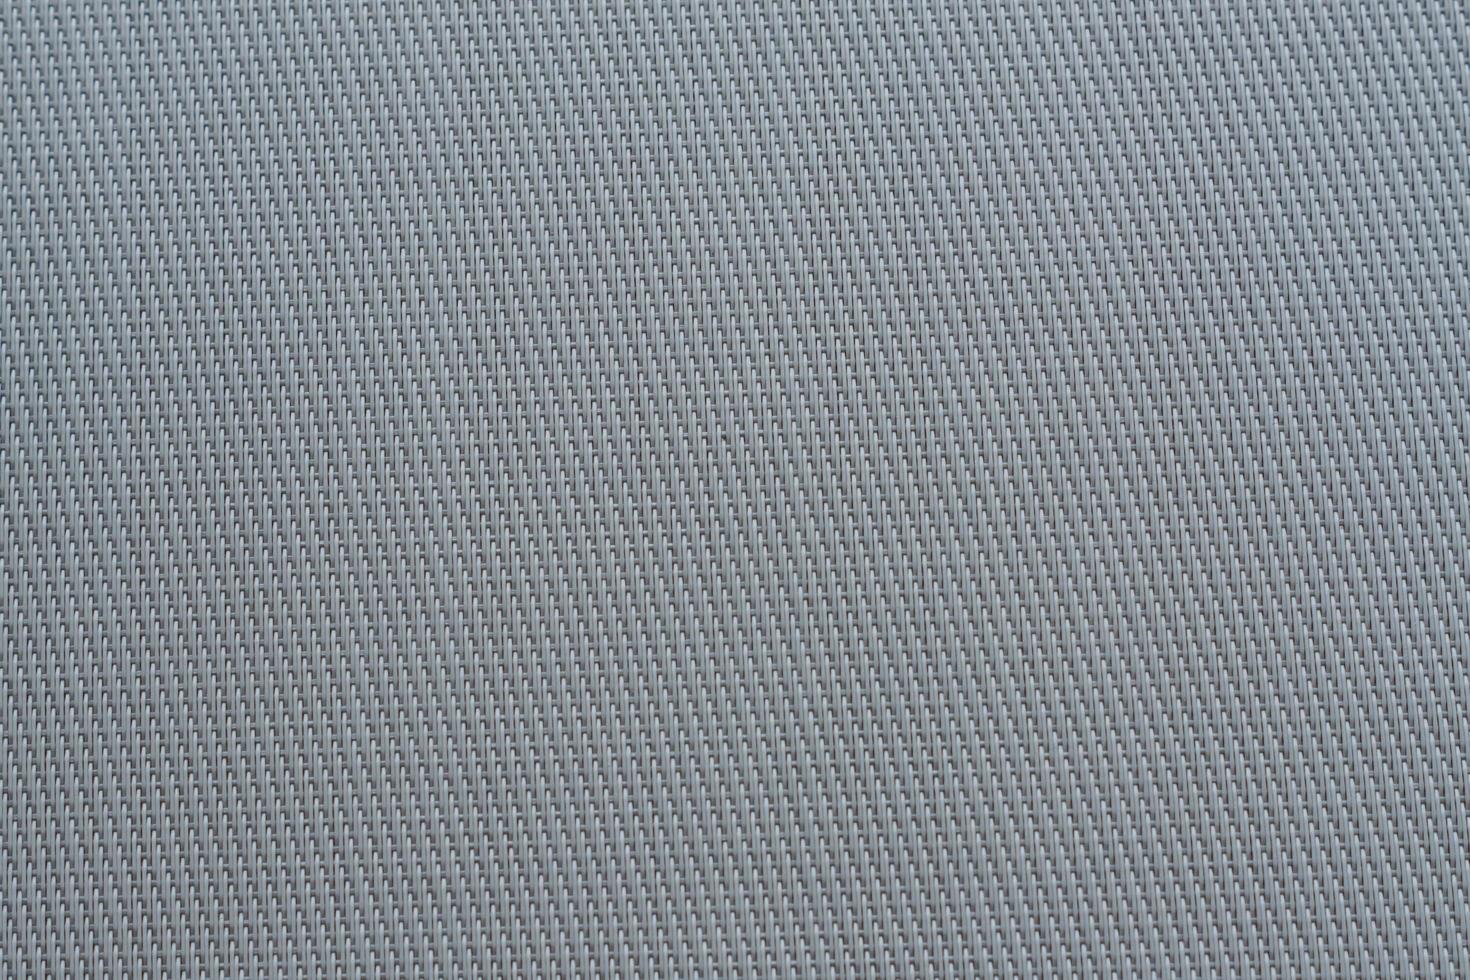 Surface of grey wicker texture background photo